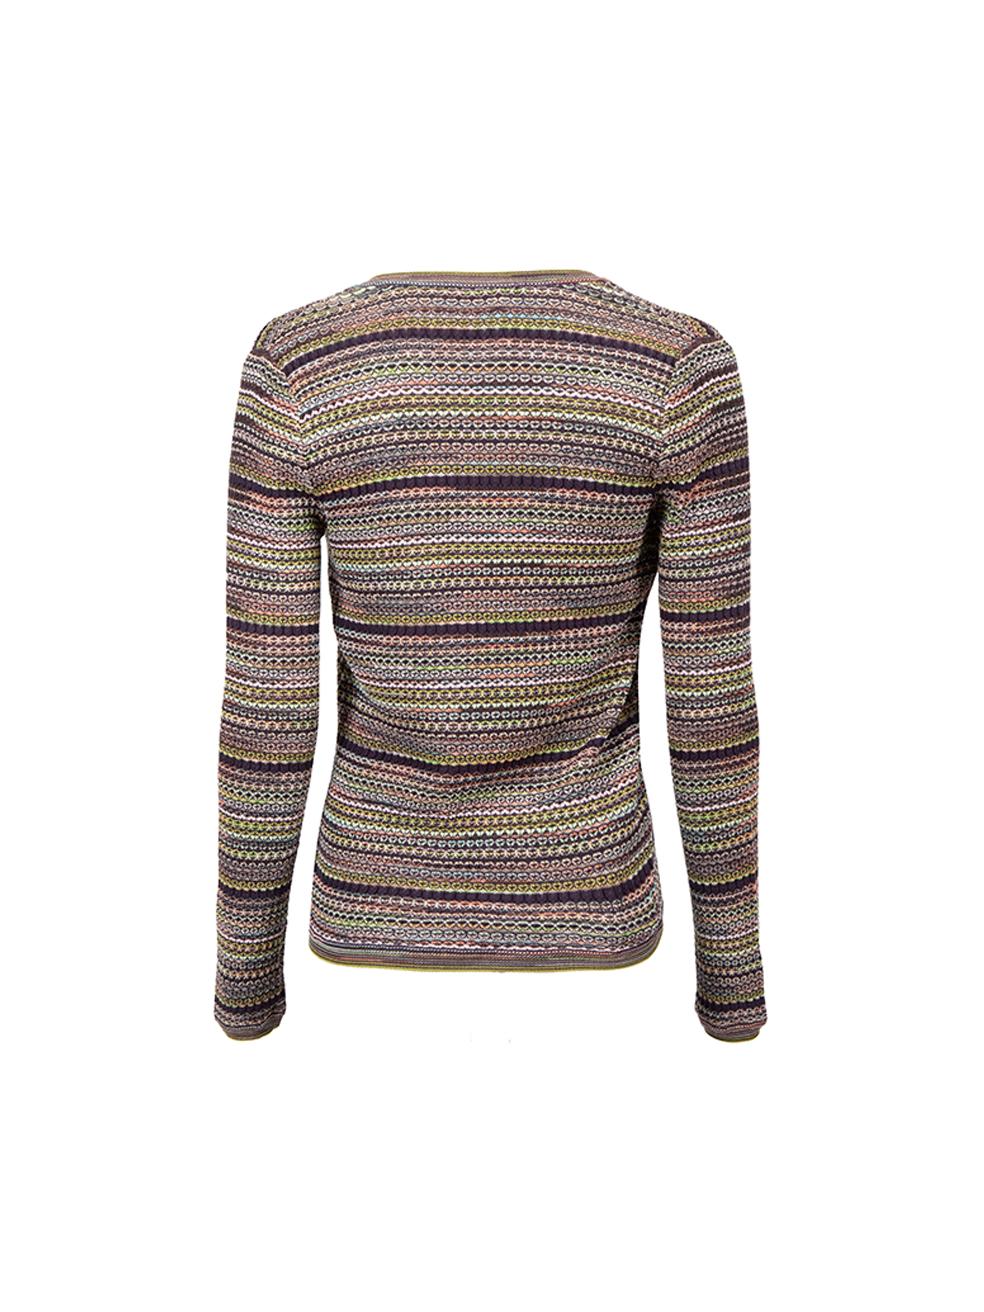 Missoni Striped Wool Knit Cardigan Size XXL In Good Condition For Sale In London, GB